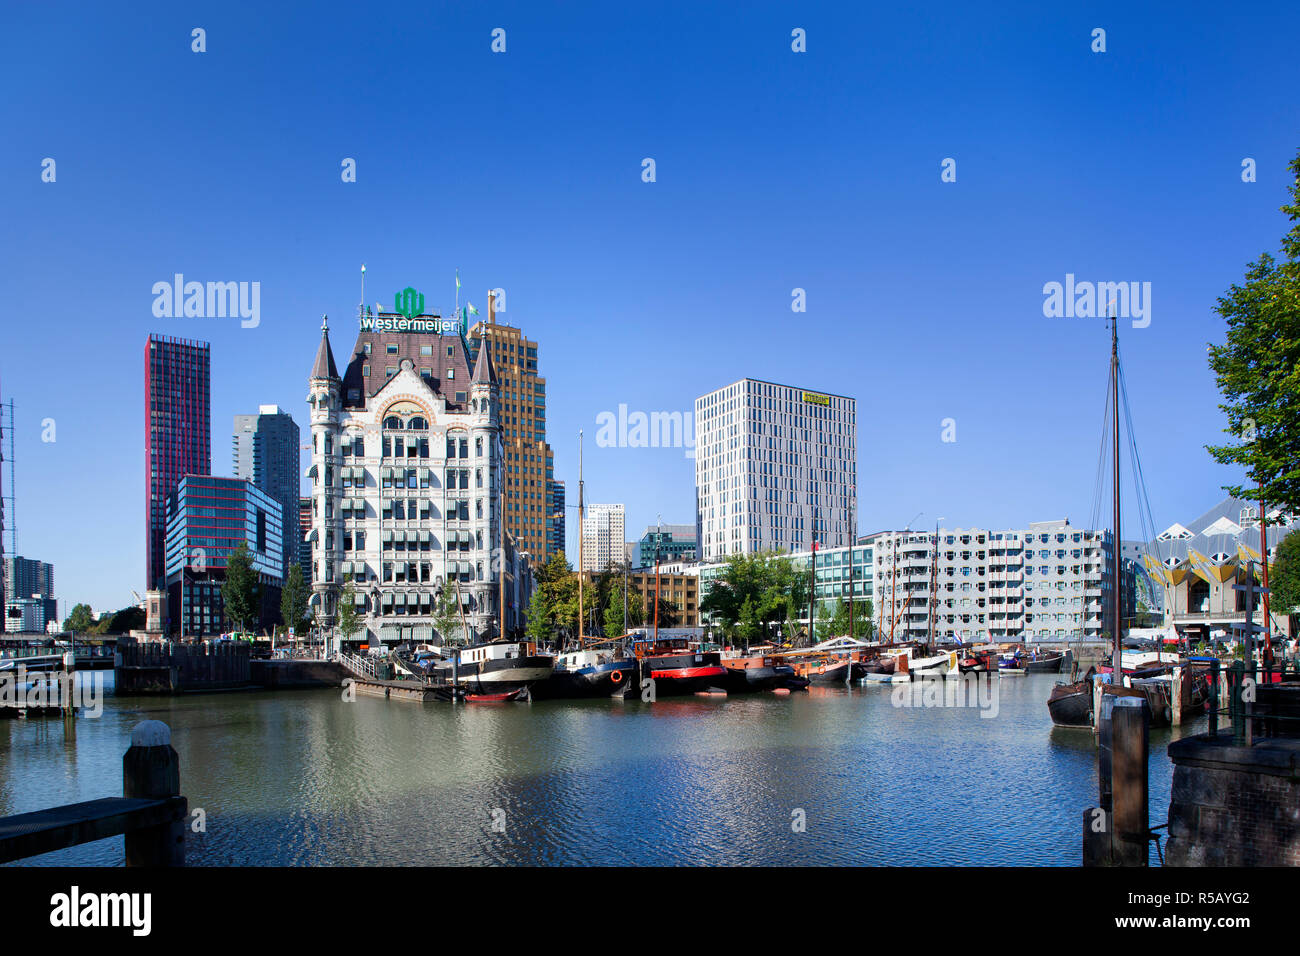 Rotterdam, Netherlands – September 18, 2018: Historical ships moored in the Oude Haven in Rotterdam with the Witte Huis or white house on the left and Stock Photo